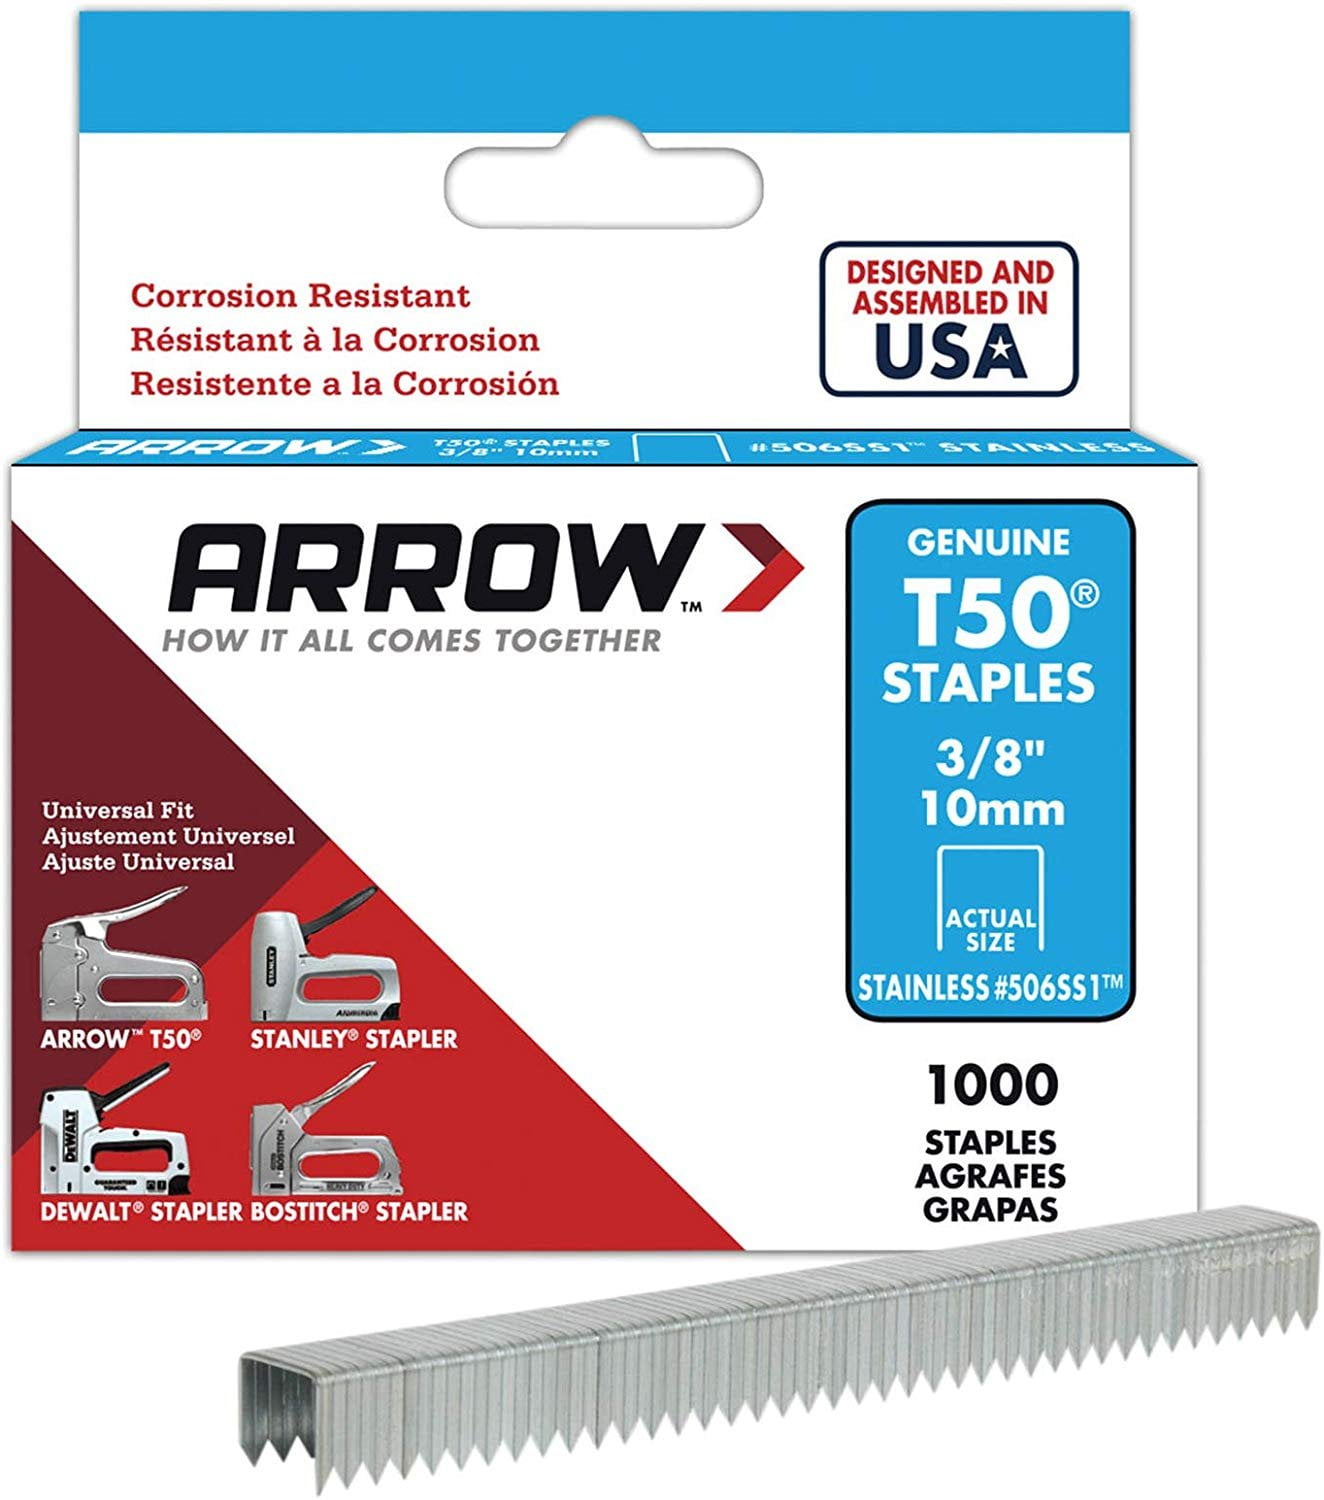 ARROW T50 Staples Box 1000 Stainless Steel 508ss 12mm 1/2in 